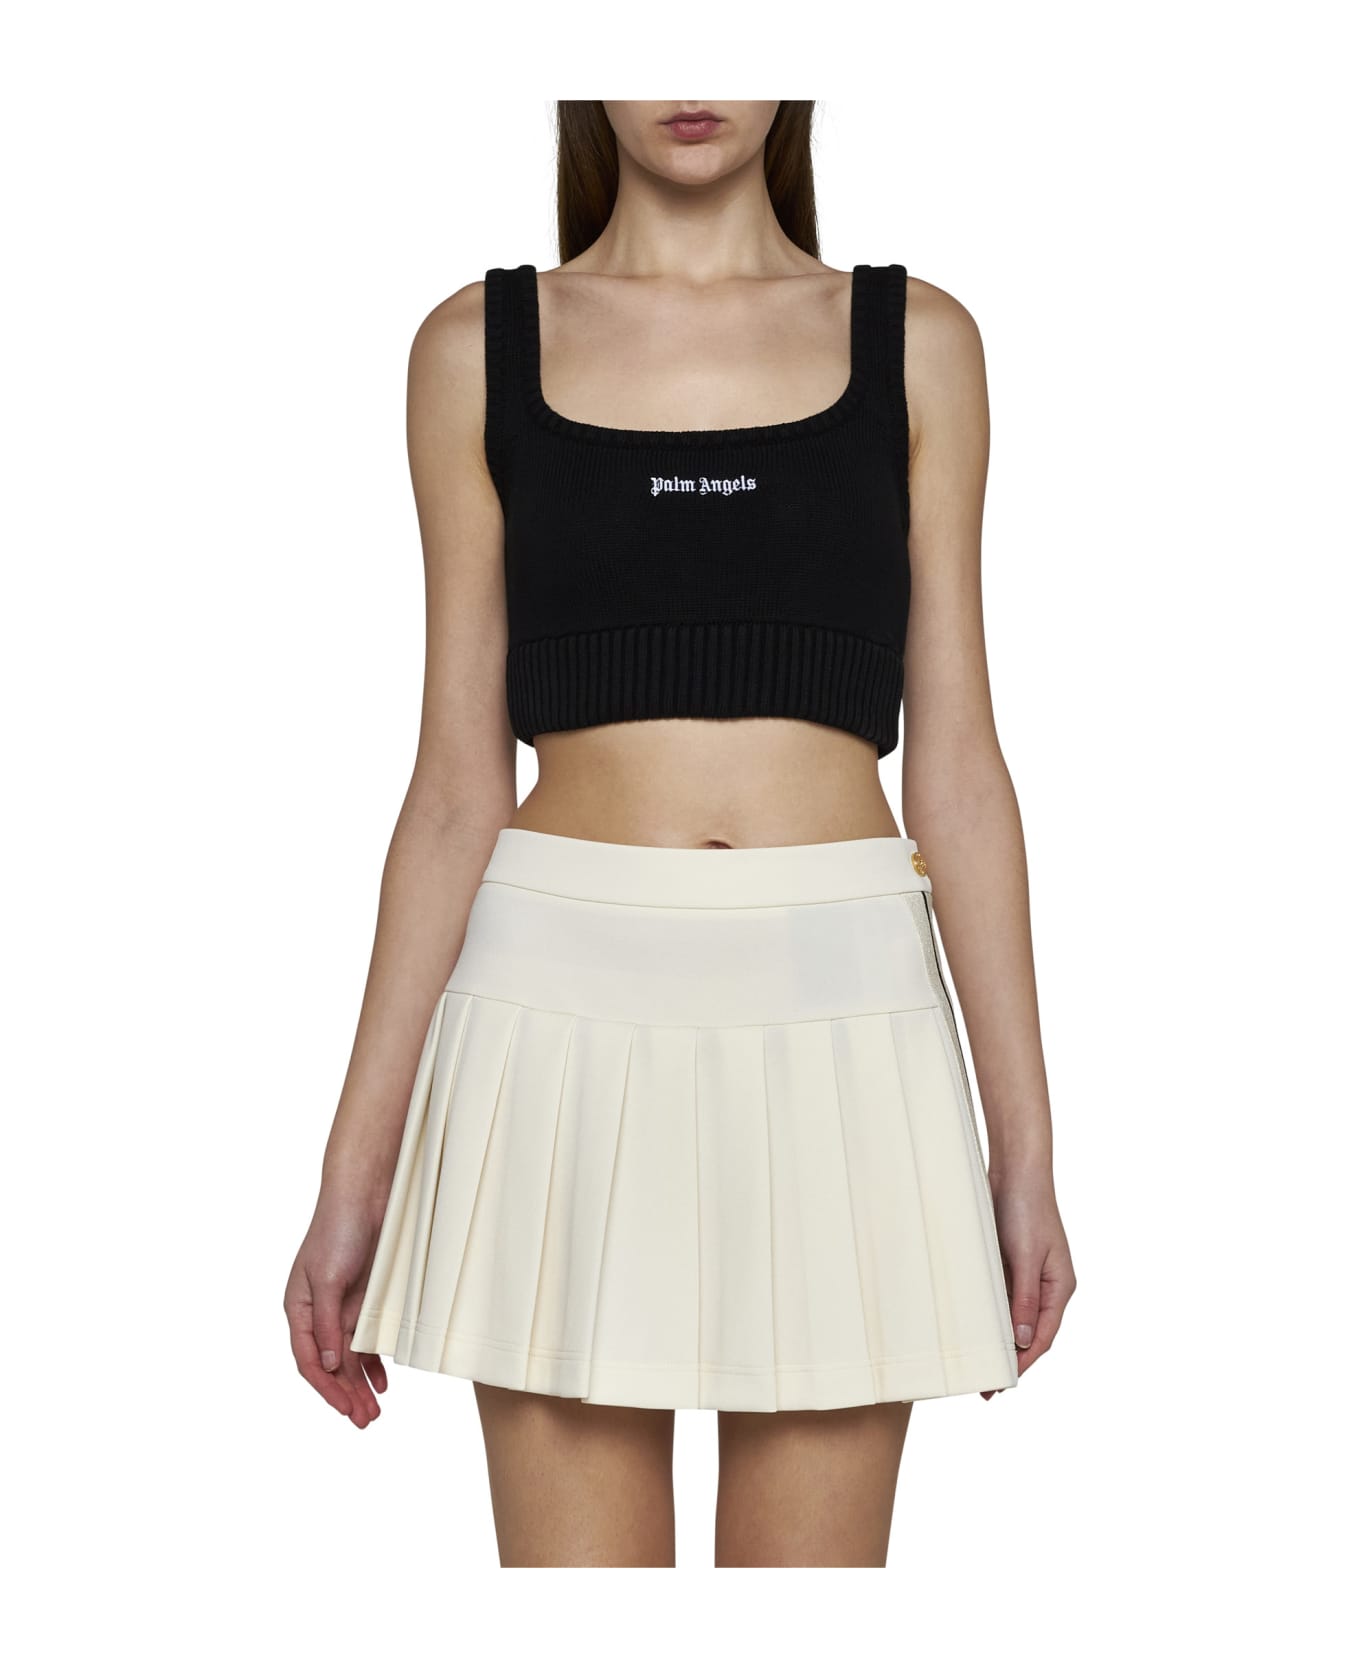 Palm Angels Logo Embroidered Cropped Knitted Tank Top - Black off white